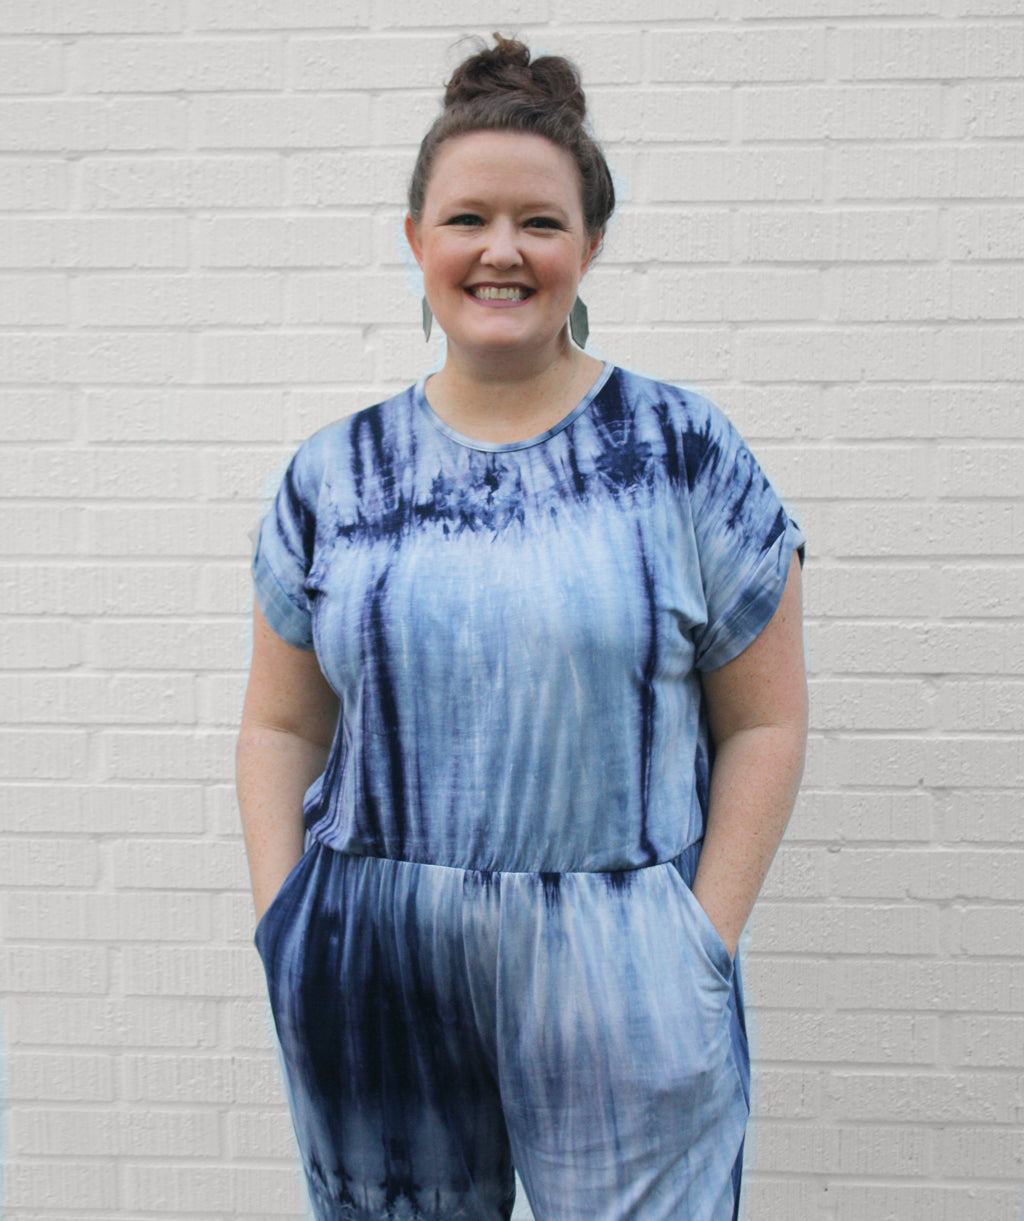 MARKET tie dye jumpsuit in Indigo<br/>(Less than perfect)